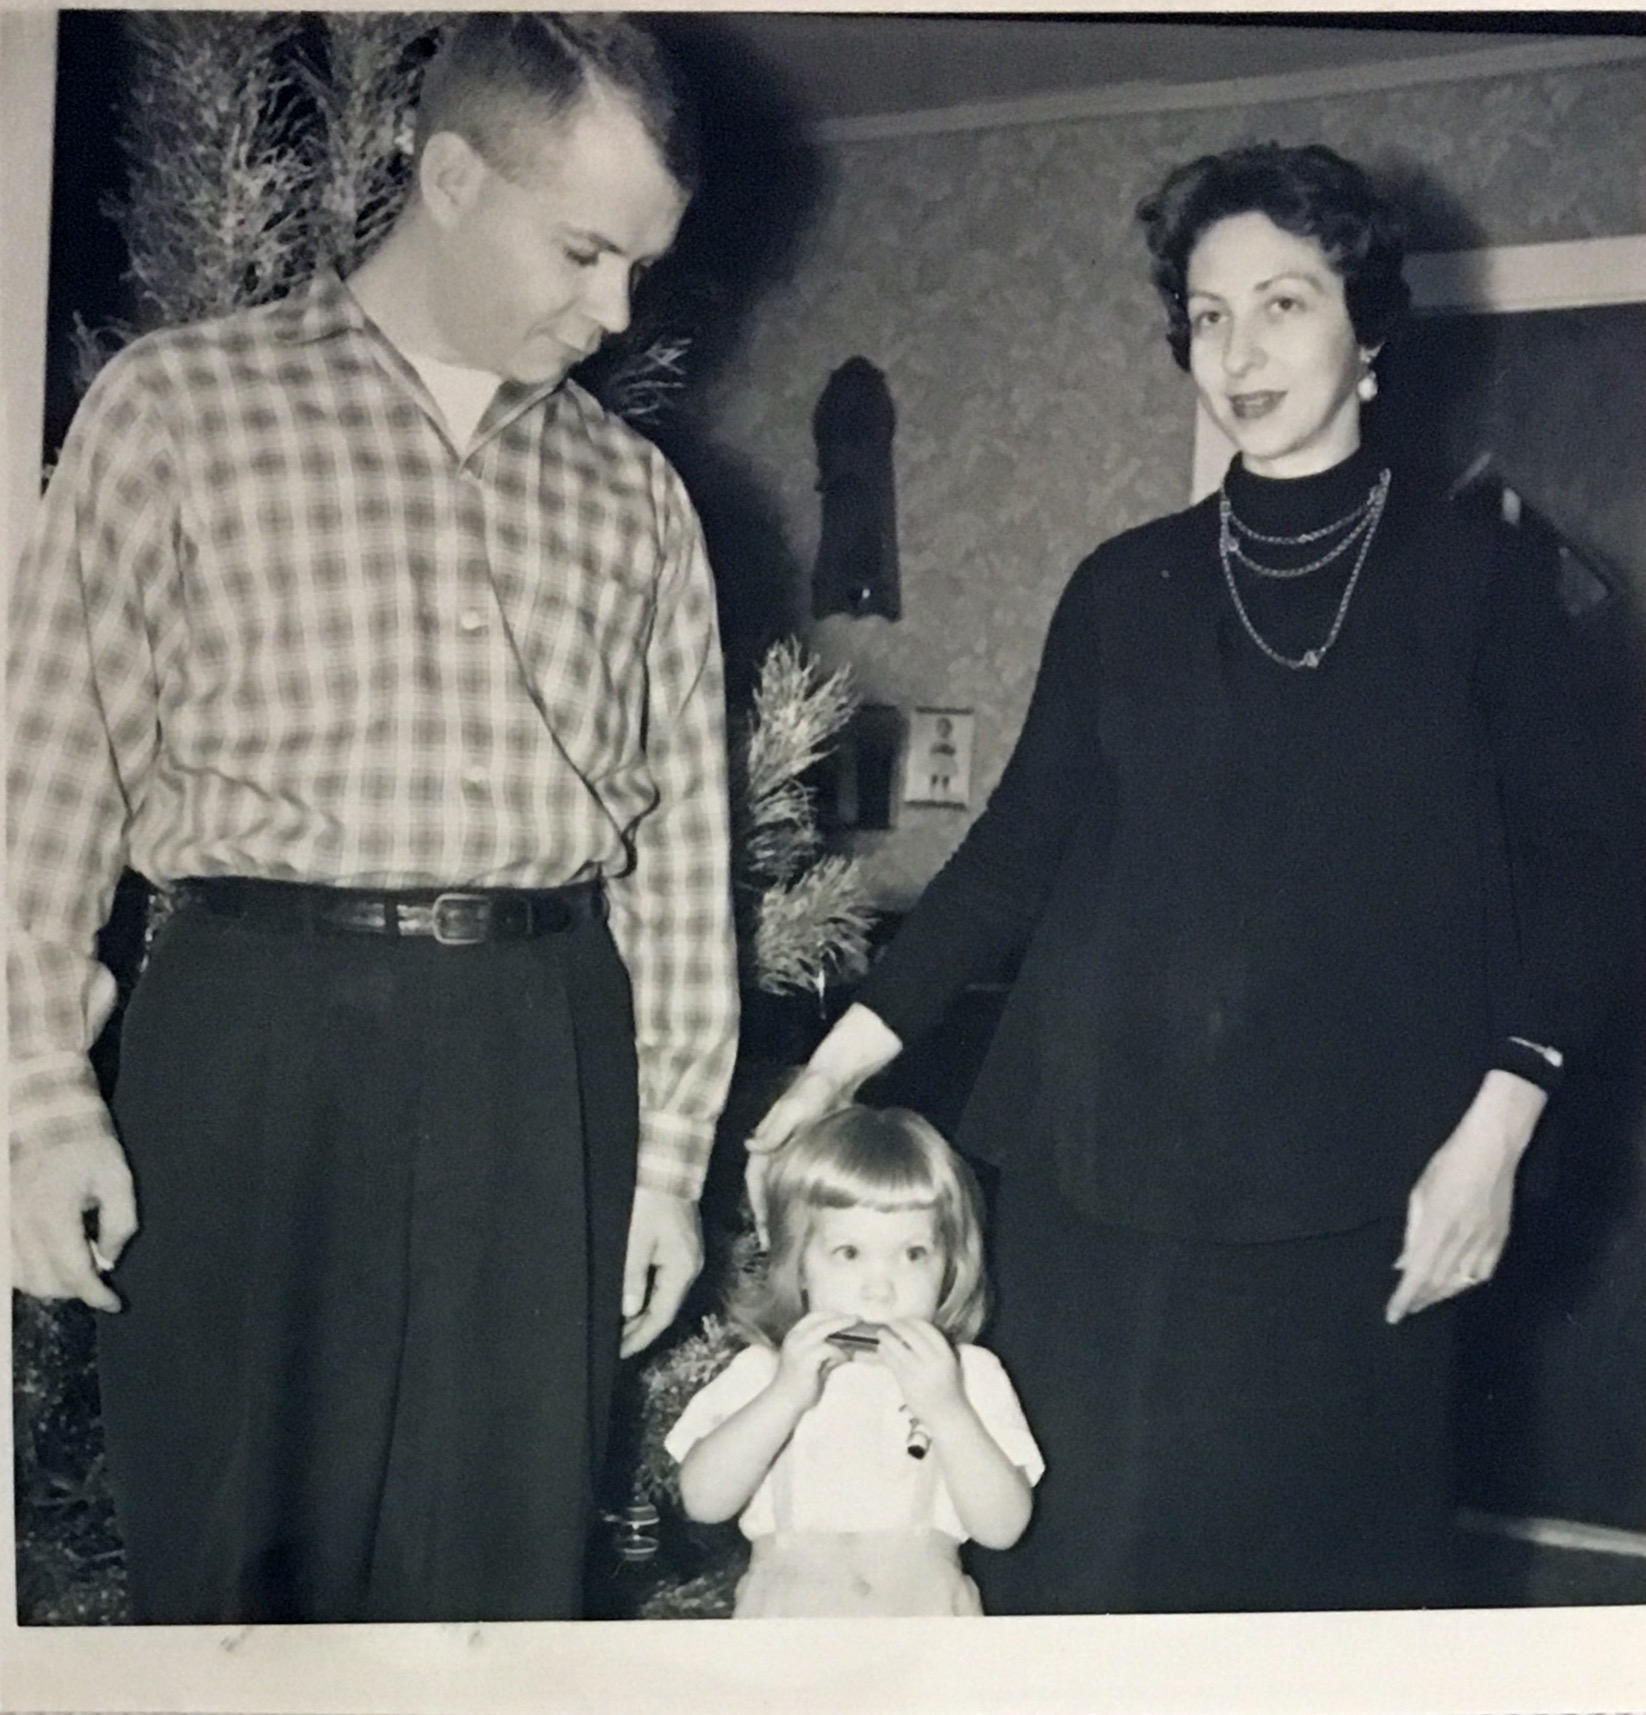 December 1957, At Grandpa and Grandma Roush’s, mom is pregnant with Diane. Birth date 2/19/1958